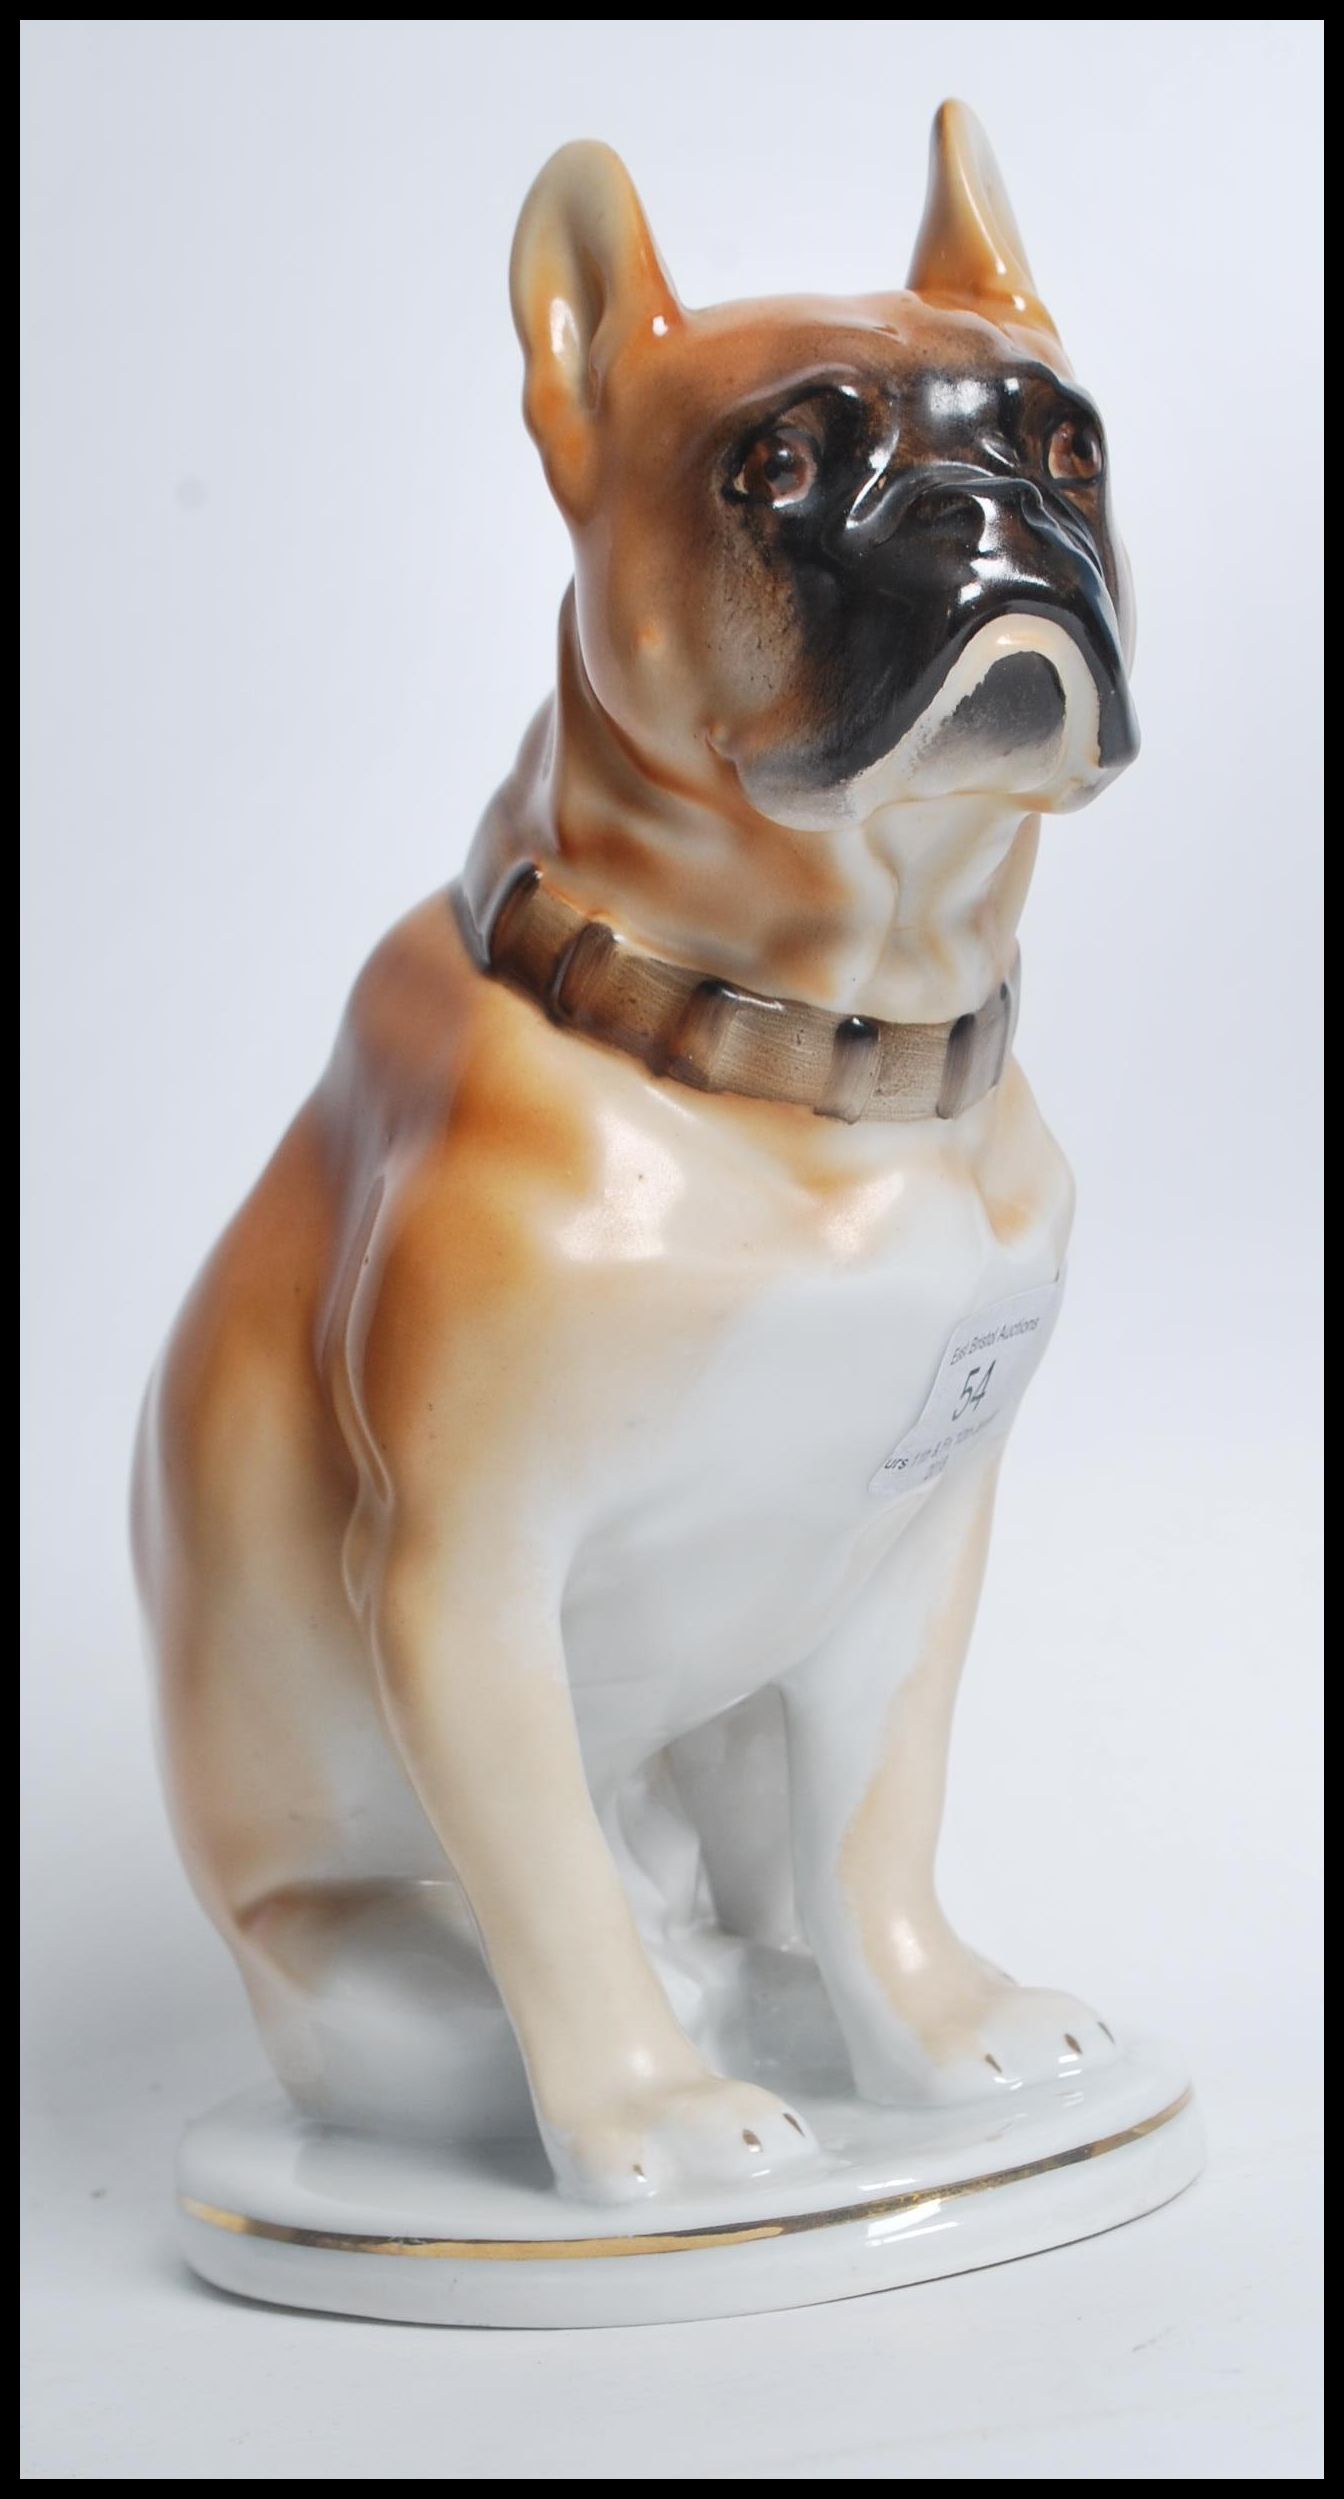 A 20th century Russian ceramic boxer dog. The dog